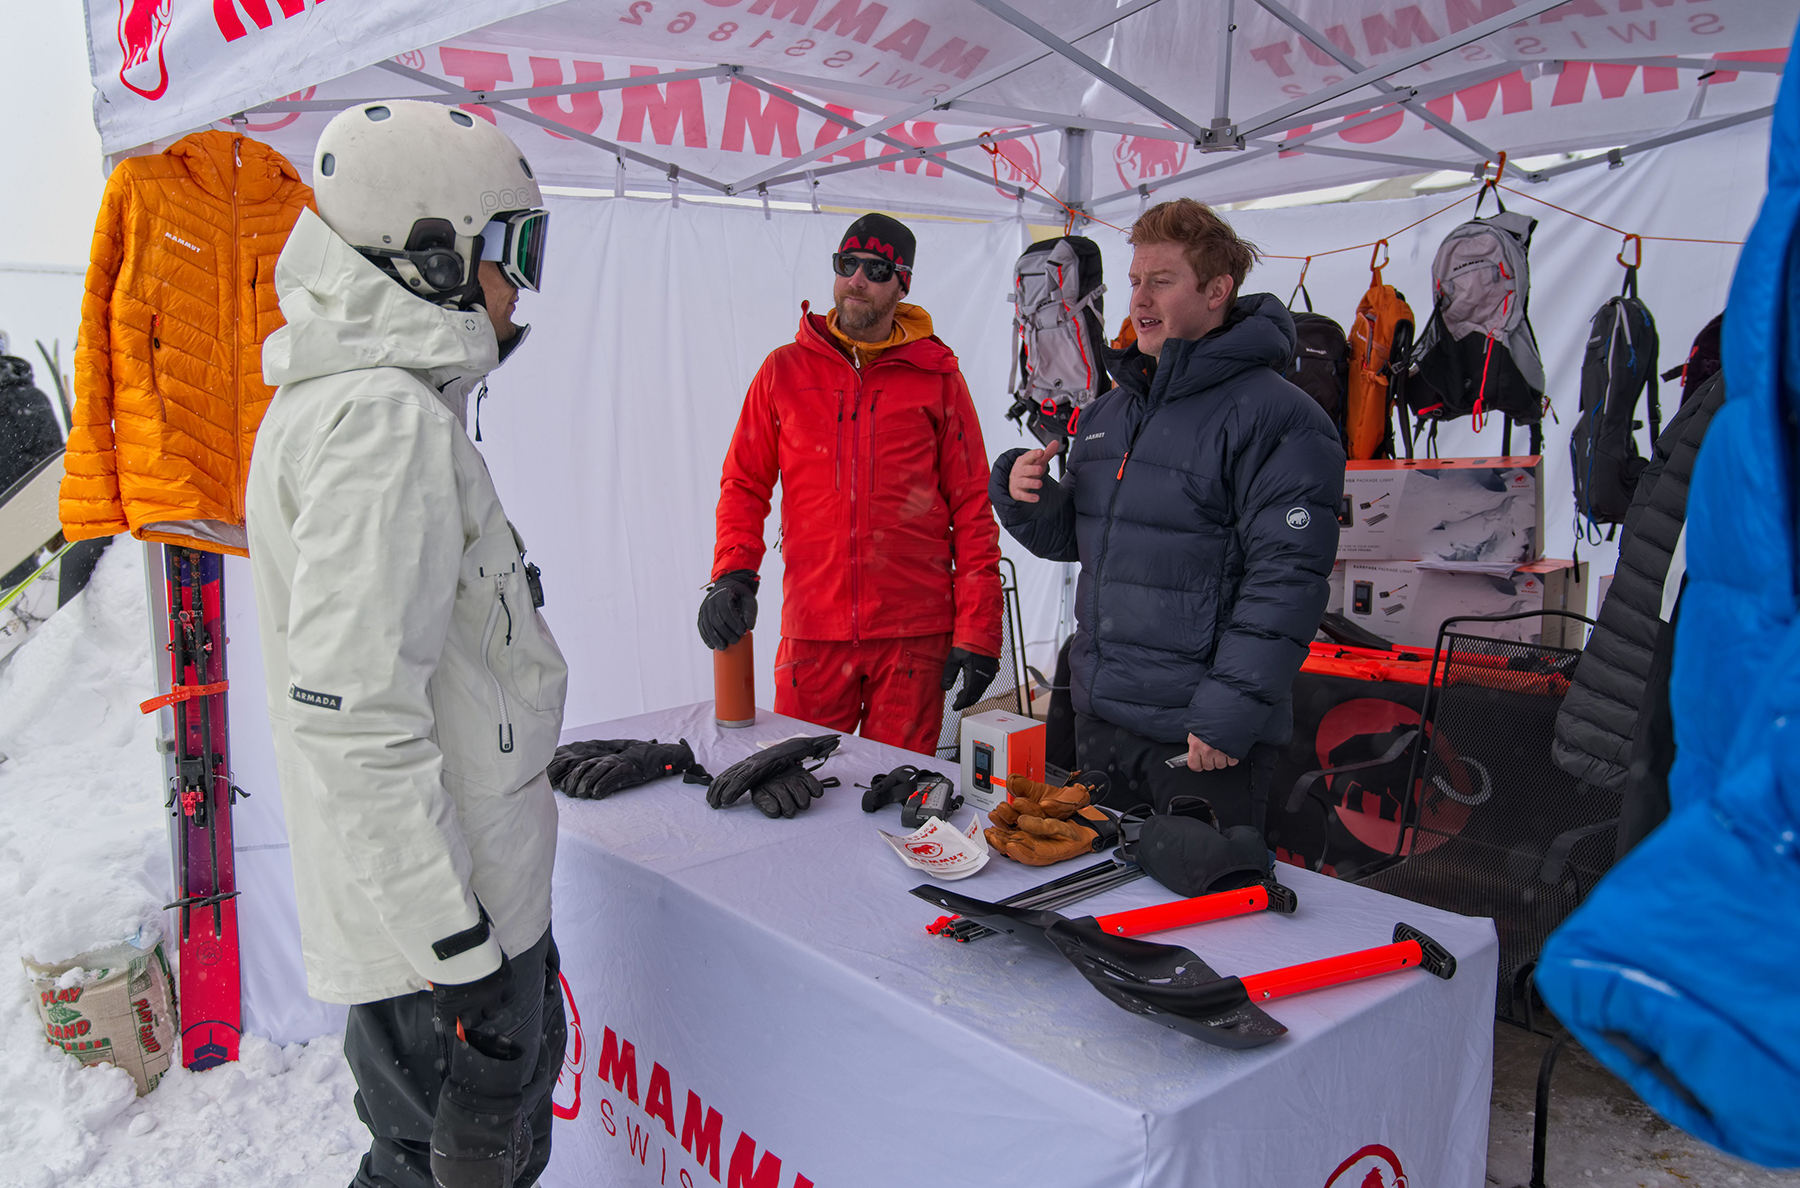 Mammut was demoing apparel and showcasing avalanche safety equipment all week